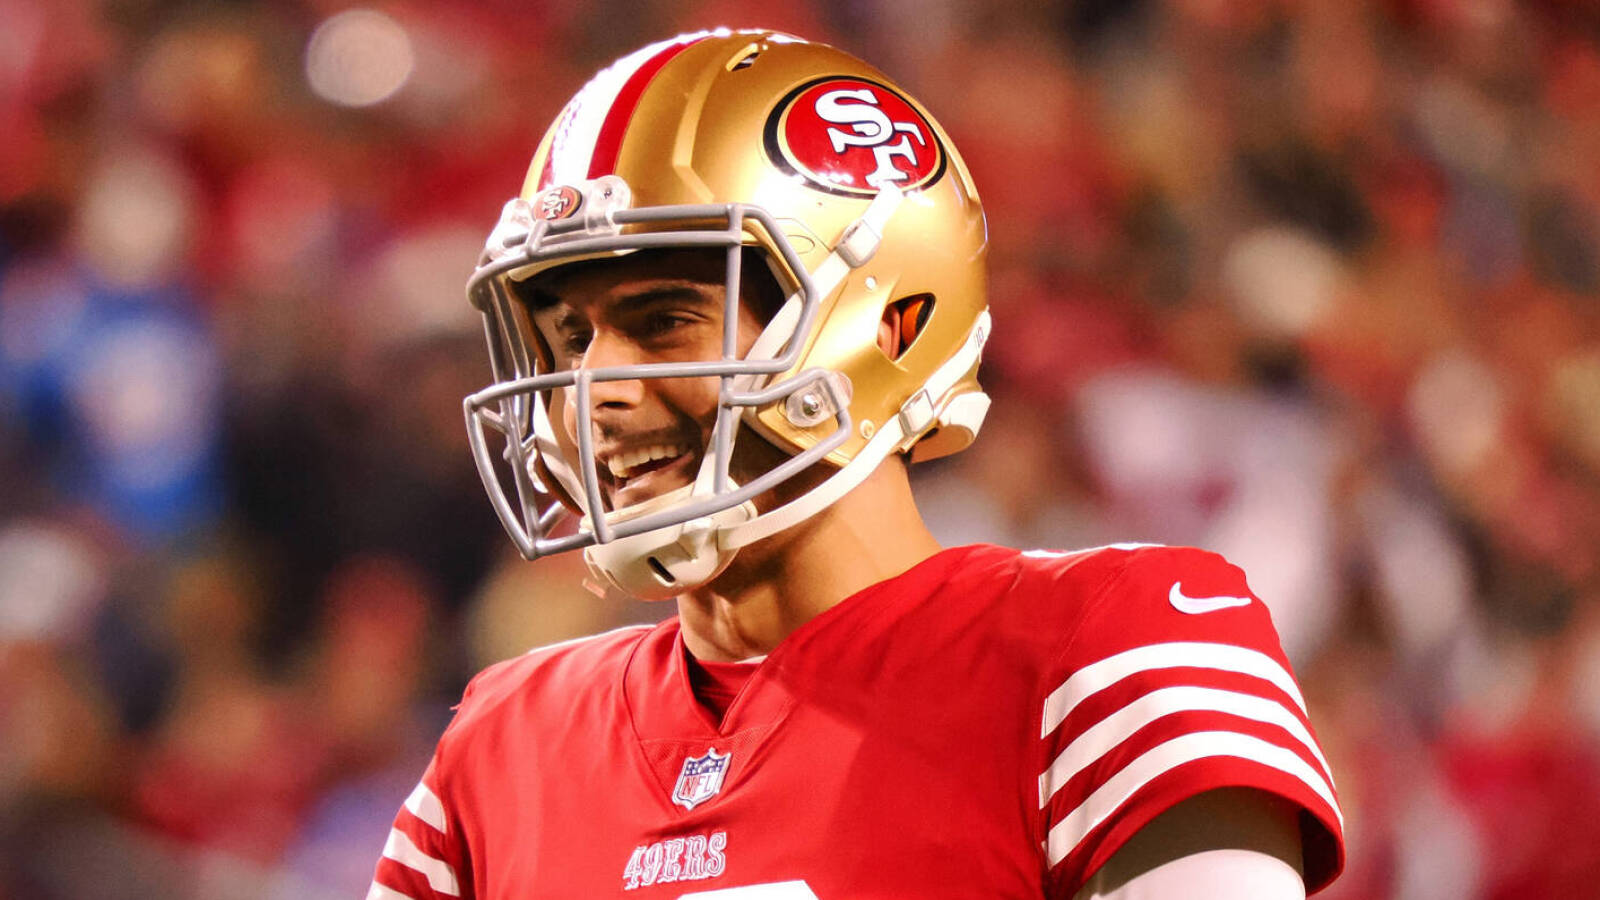 Cris Collinsworth: Jimmy Garoppolo can take 49ers to Super Bowl victory